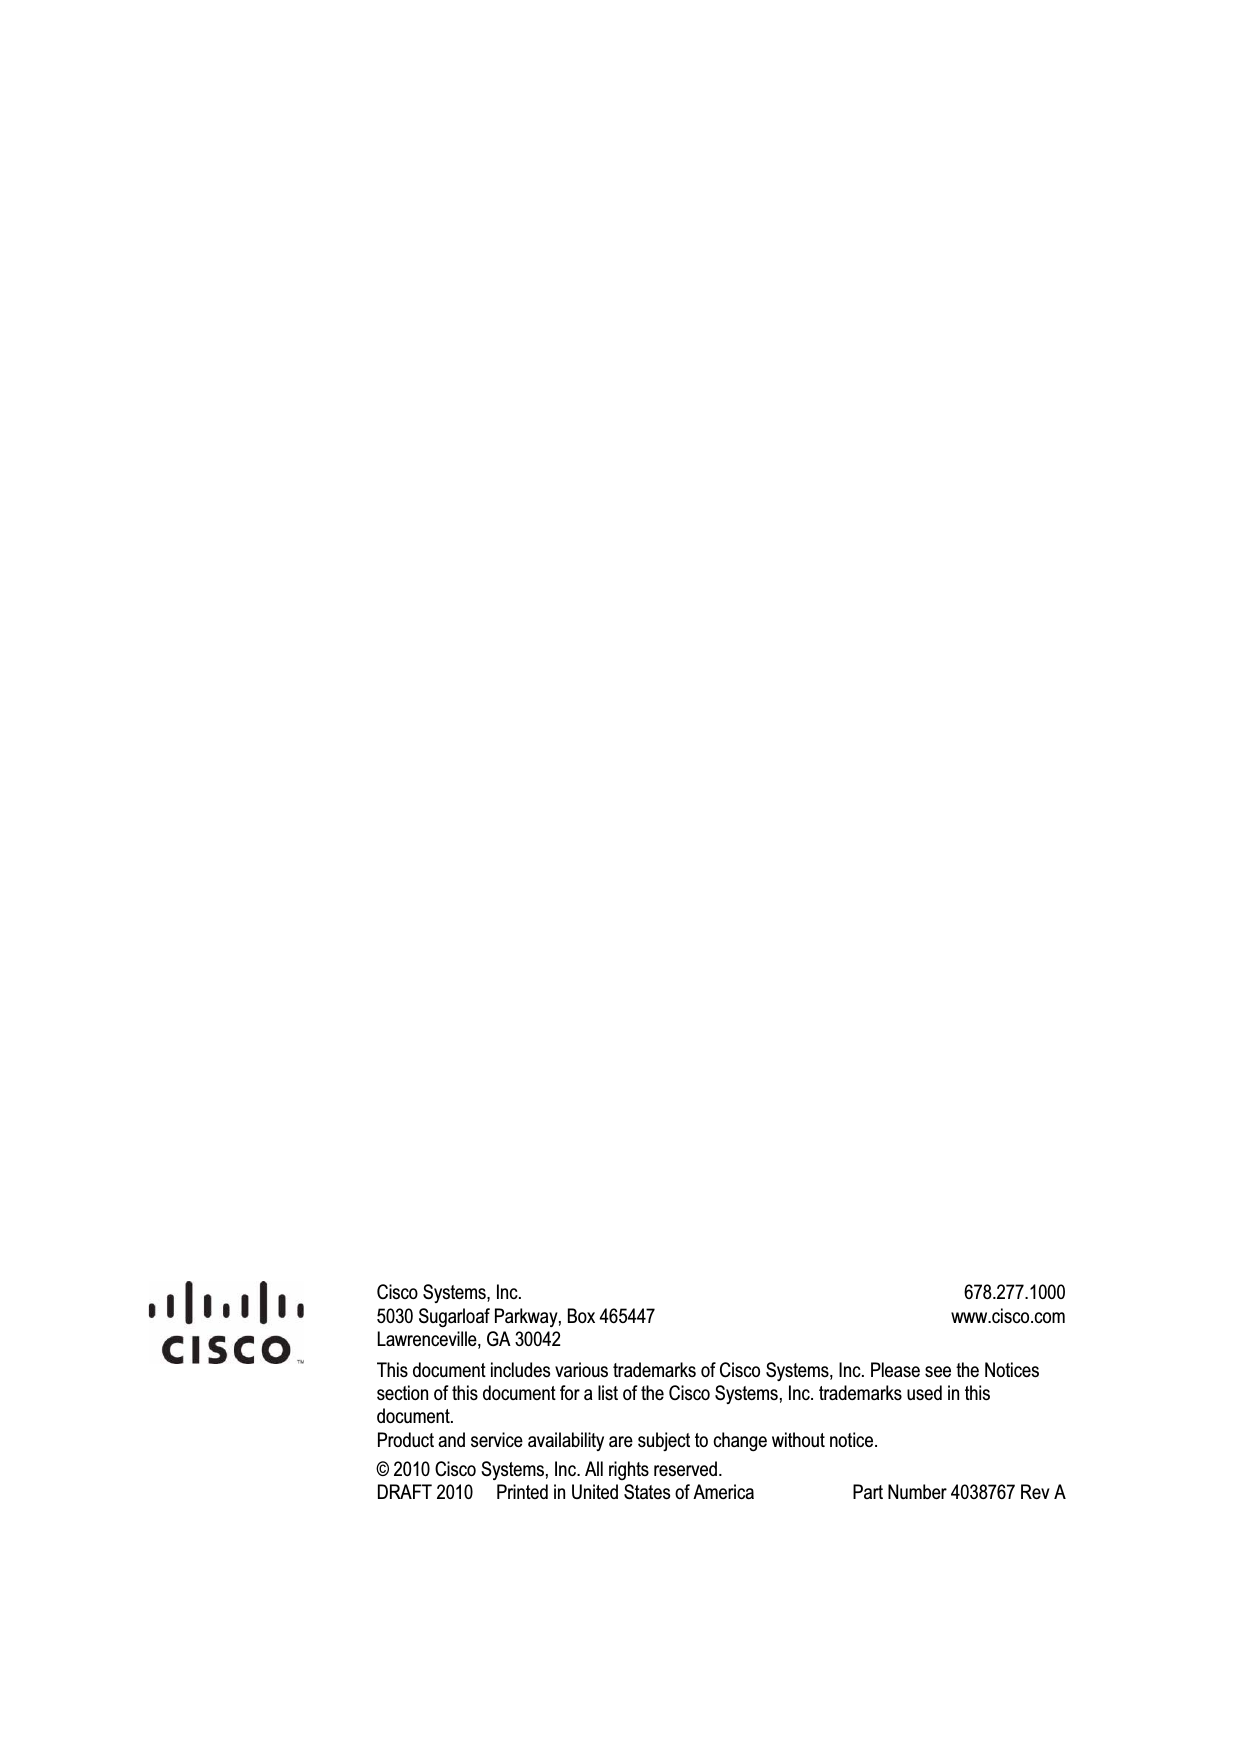                             Cisco Systems, Inc.  5030 Sugarloaf Parkway, Box 465447 Lawrenceville, GA 30042   678.277.1000 www.cisco.com This document includes various trademarks of Cisco Systems, Inc. Please see the Notices section of this document for a list of the Cisco Systems, Inc. trademarks used in this document. Product and service availability are subject to change without notice. © 2010 Cisco Systems, Inc. All rights reserved. DRAFT 2010     Printed in United States of America   Part Number 4038767 Rev A   